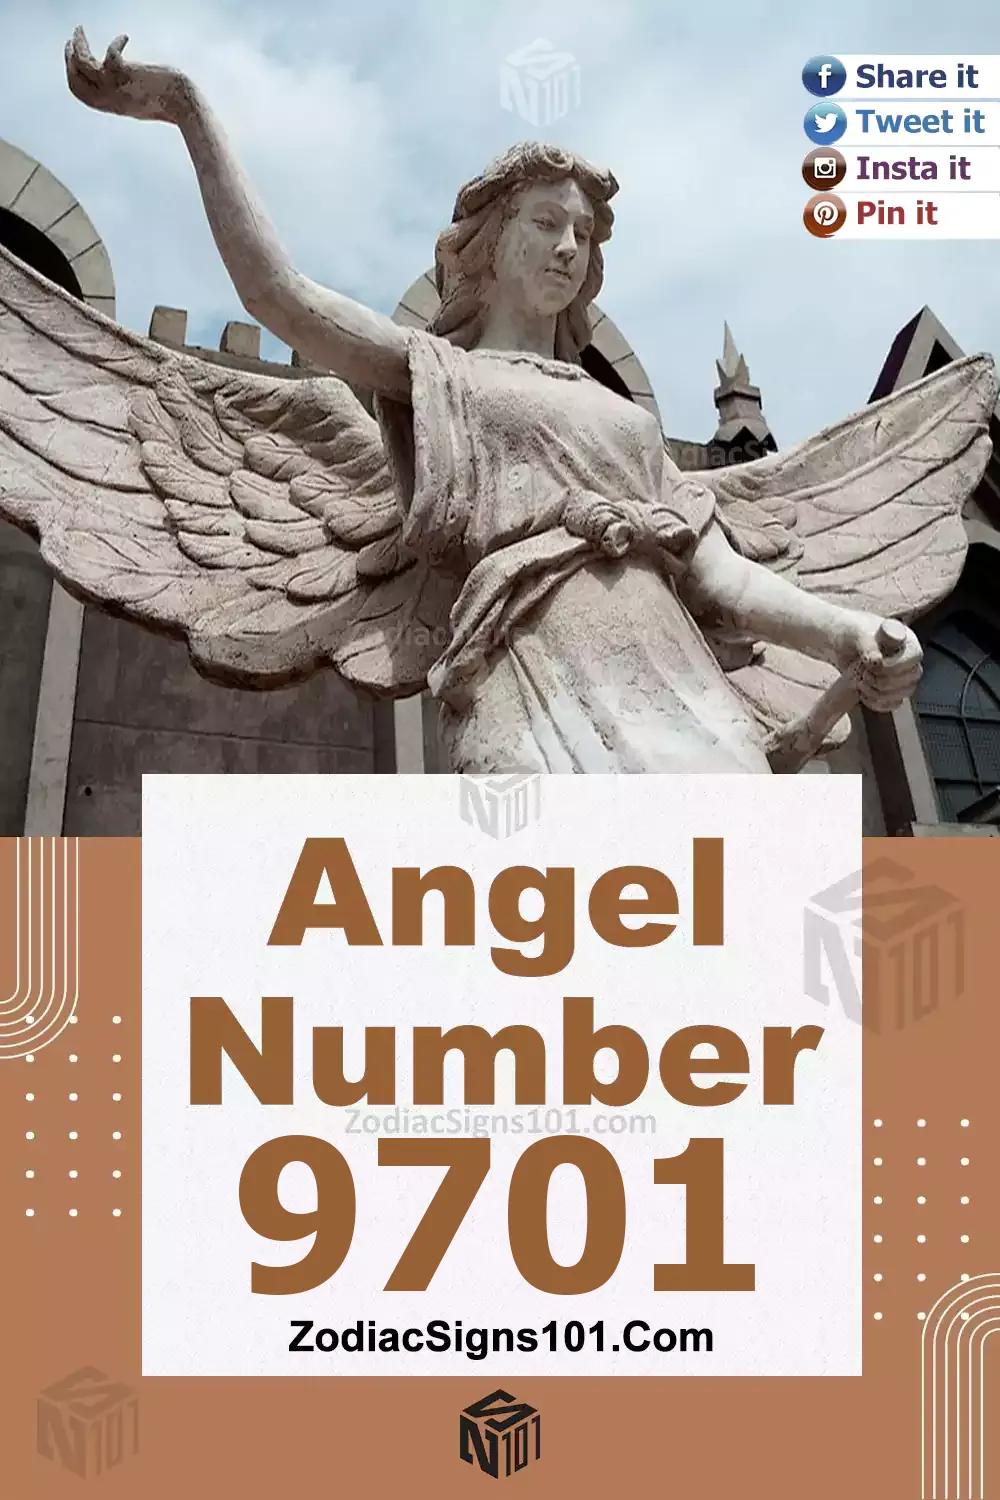 9701 Angel Number Meaning